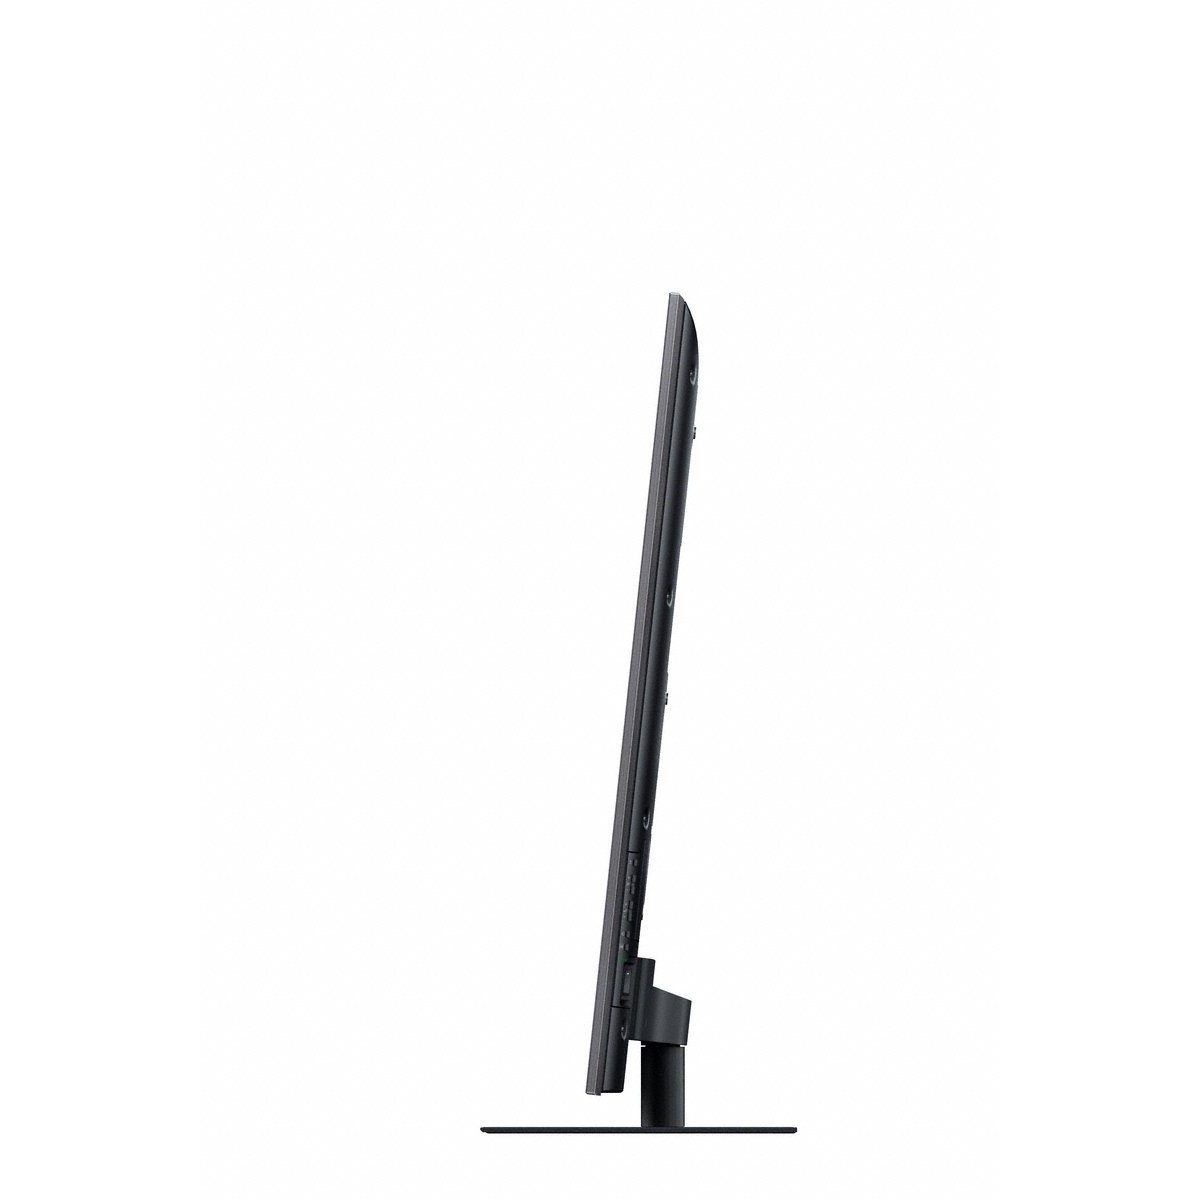 http://thetechjournal.com/wp-content/uploads/images/1107/1310010270-sony-bravia-xbr46hx929-46inch-1080p-3d-localdimming-led-hdtv-4.jpg